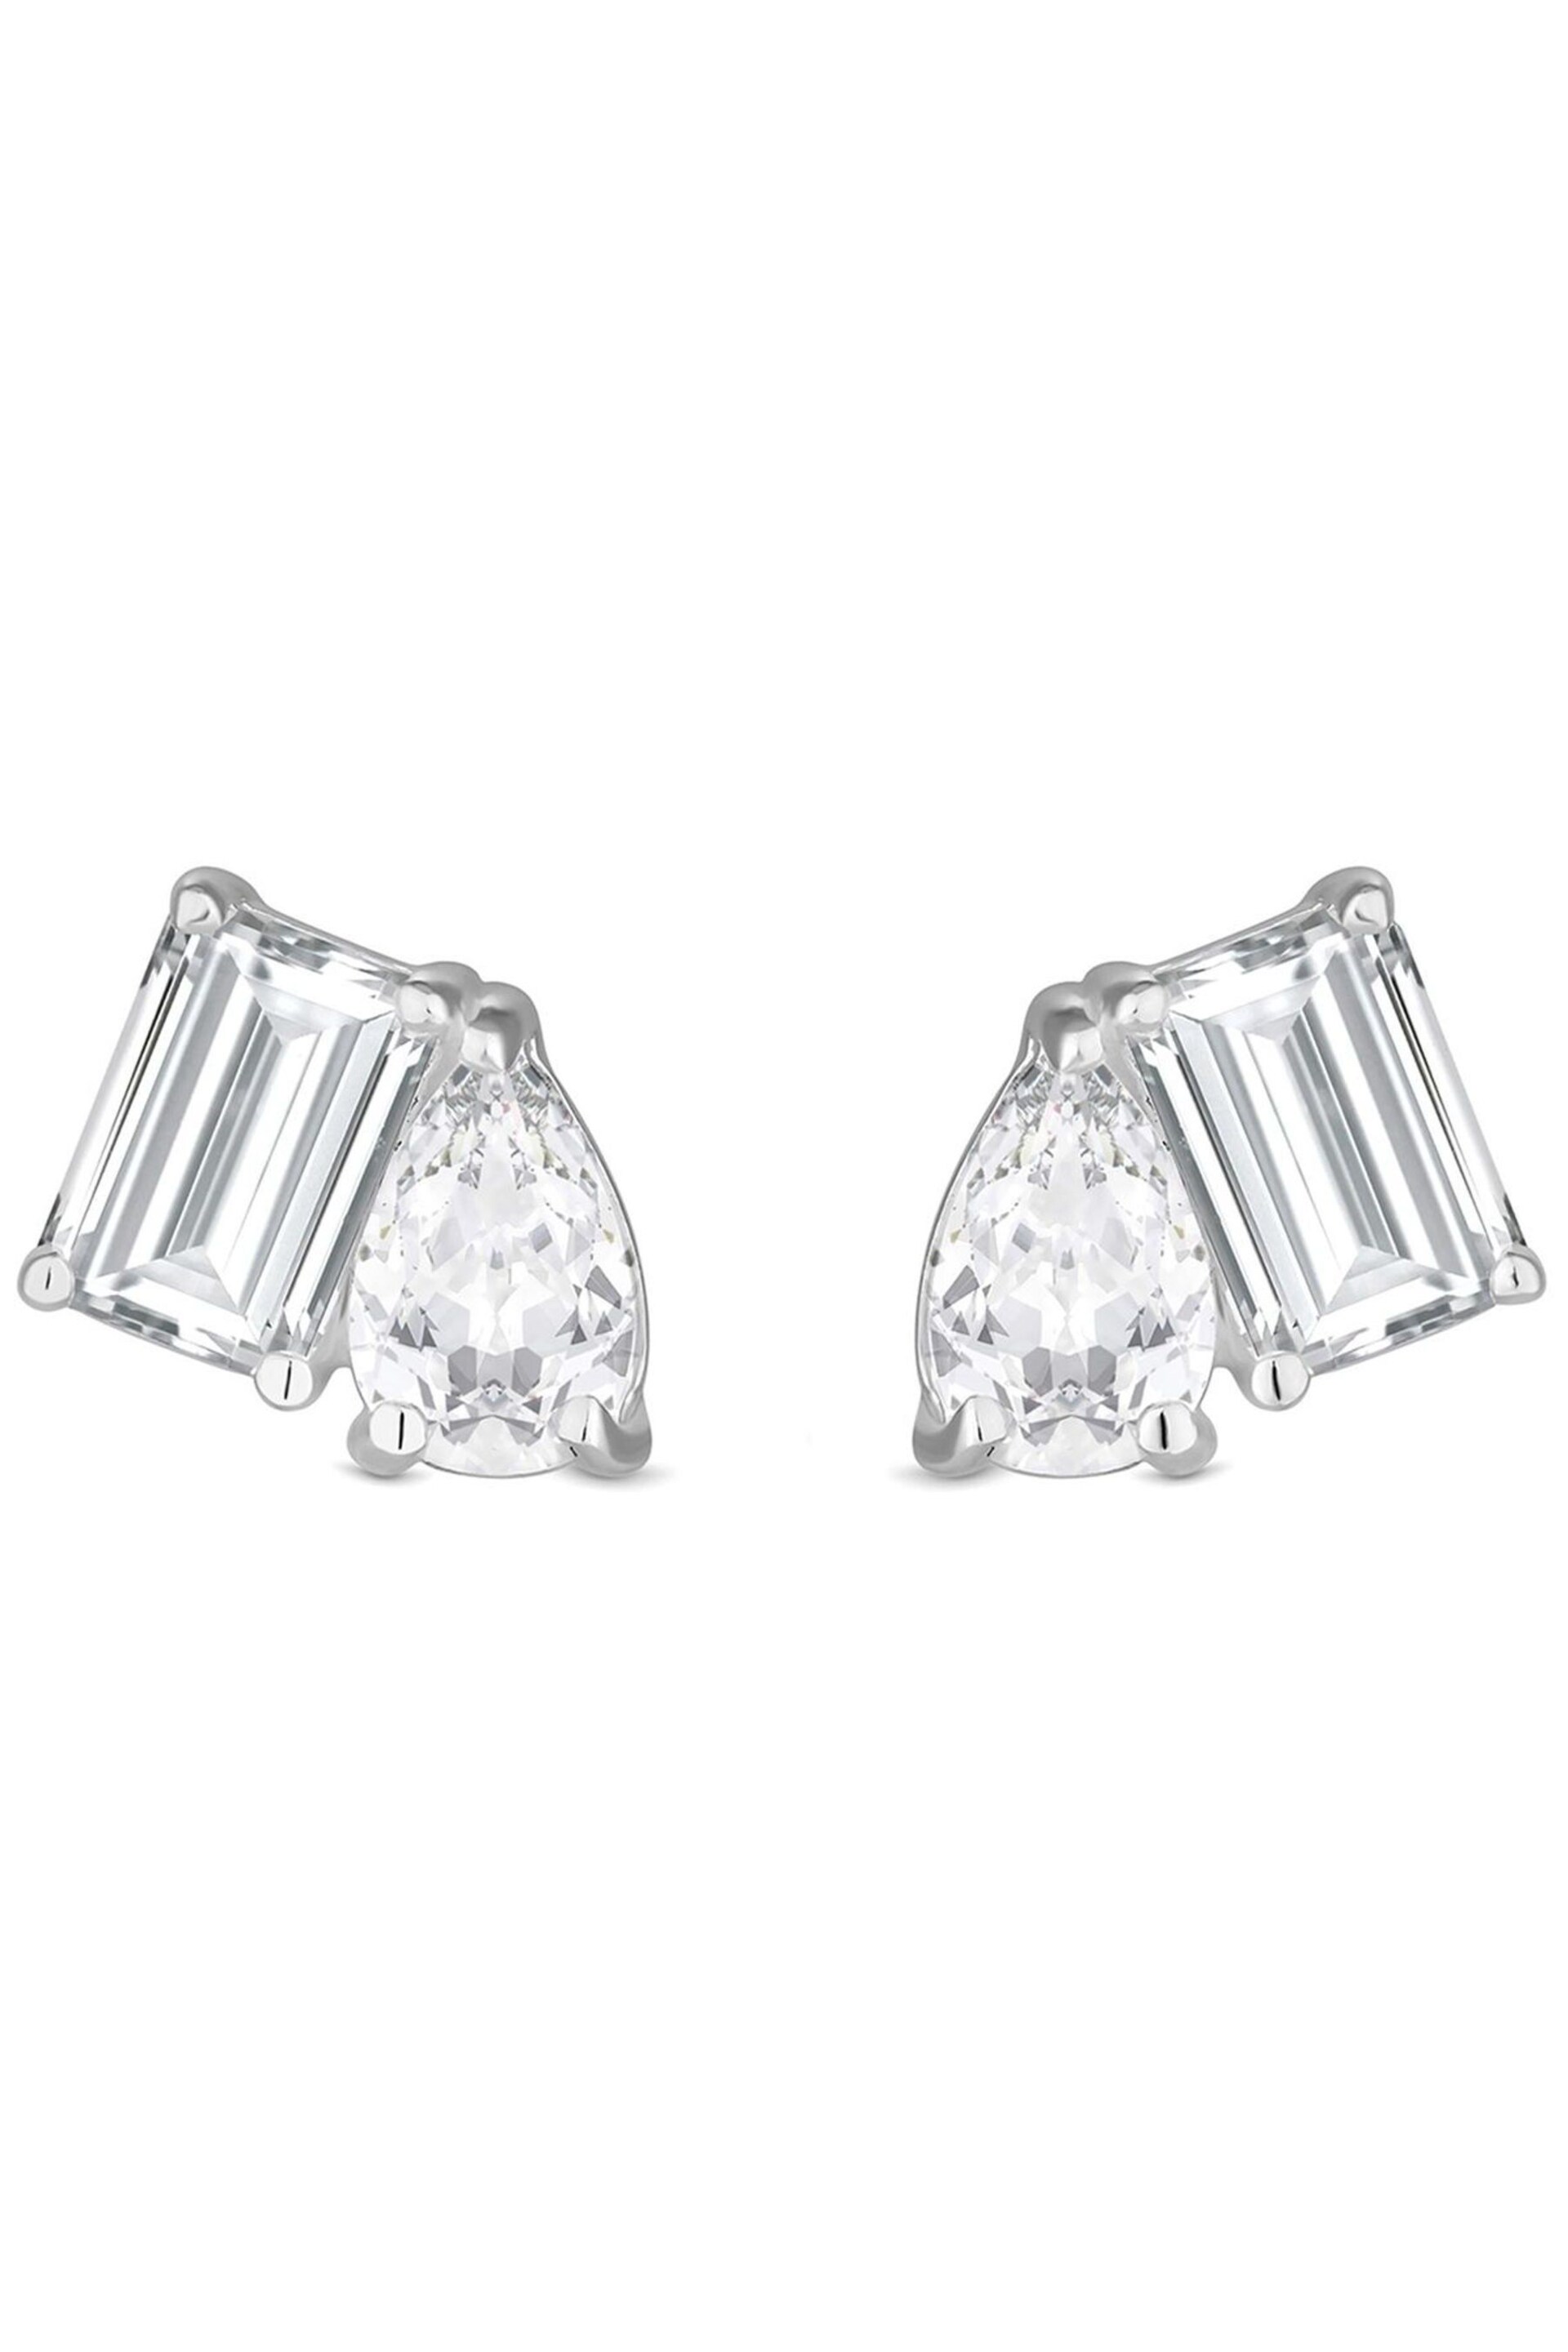 Simply Silver Silver Cubic Zirconia Mixed Stone Stud Earrings - Image 1 of 1